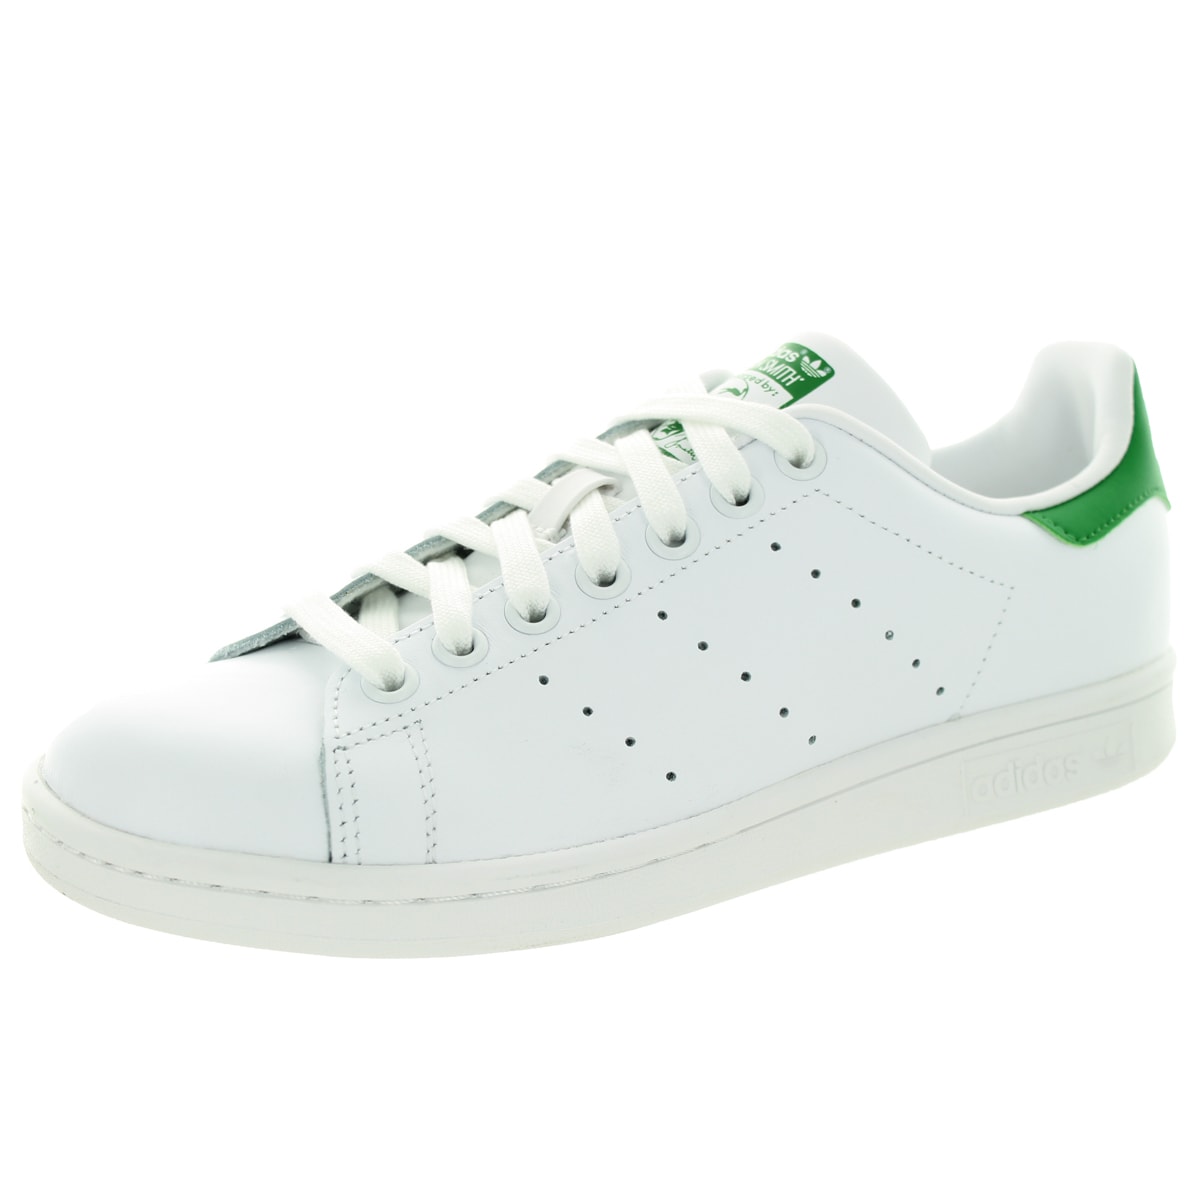 Green - Size 7 - On Sale - Overstock 